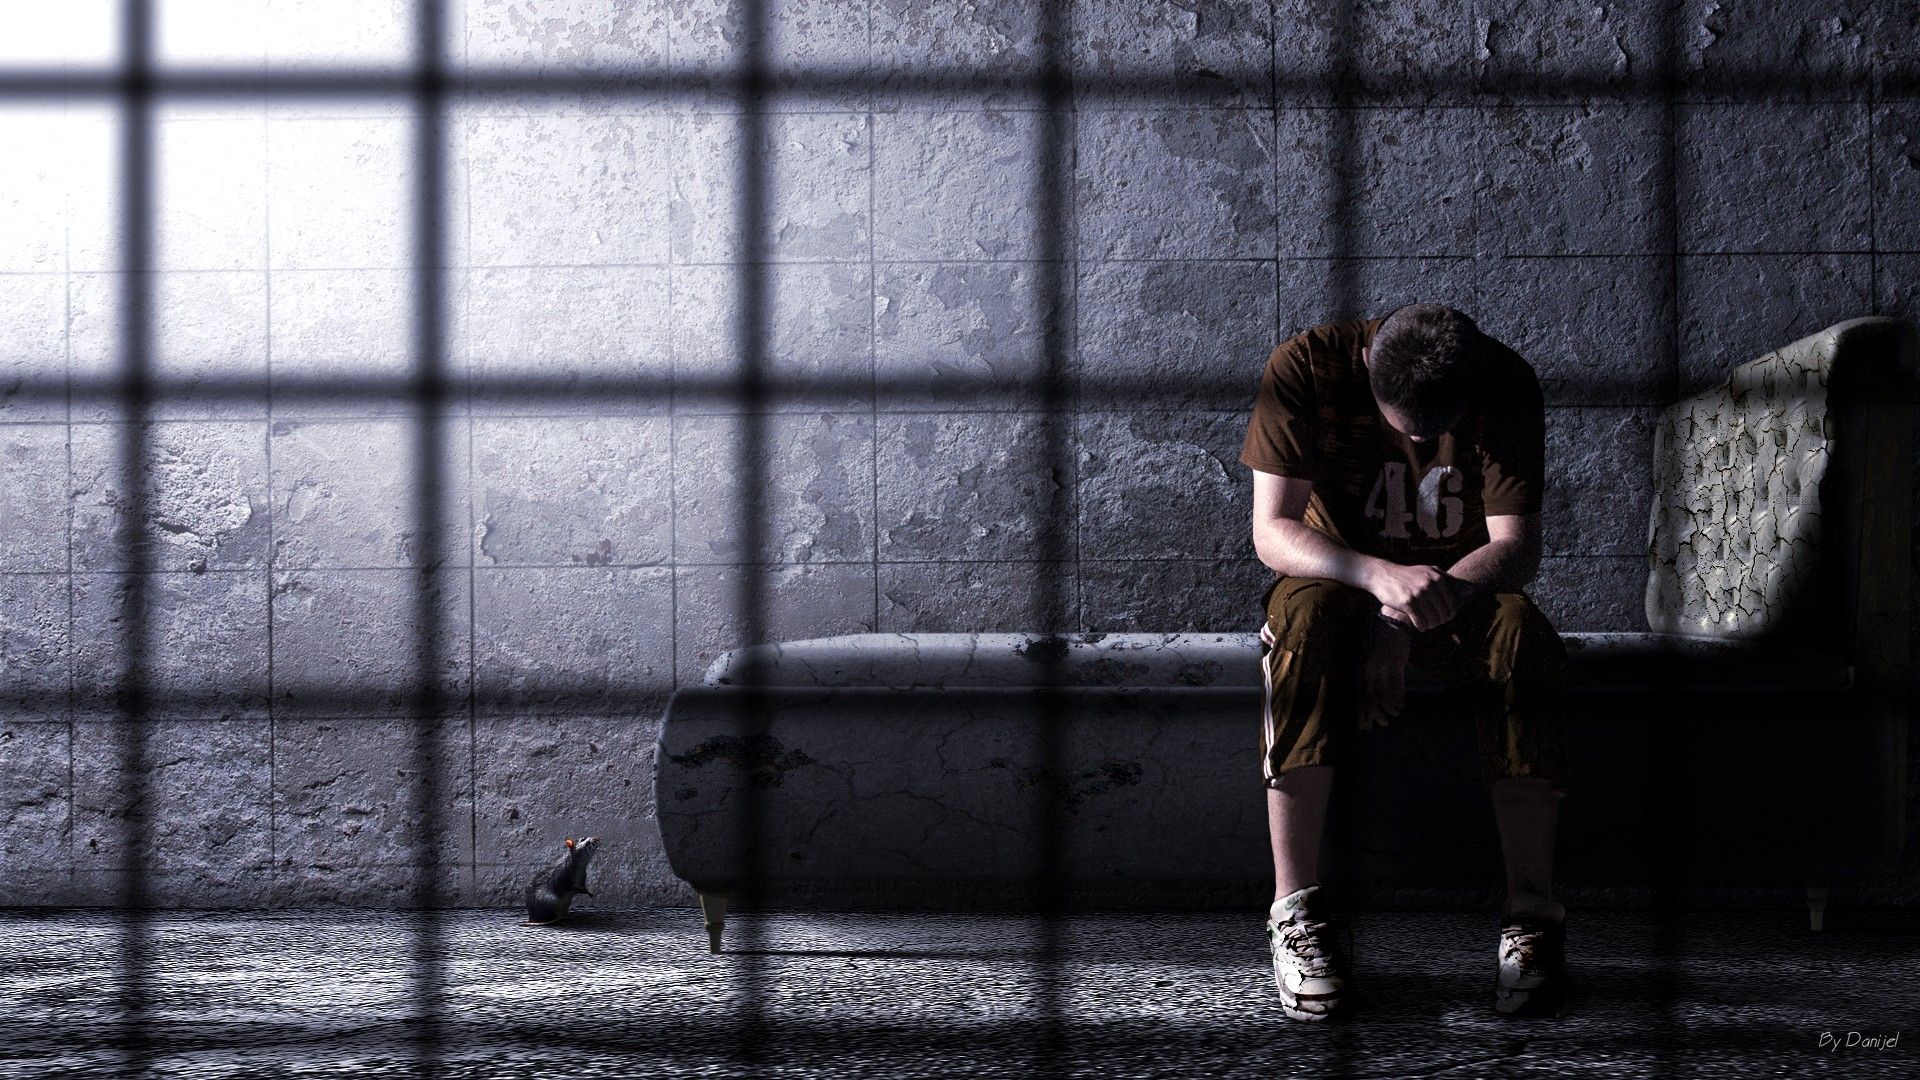 In Prison: Never Give Up: How I Found Strength In My Darkest Moments